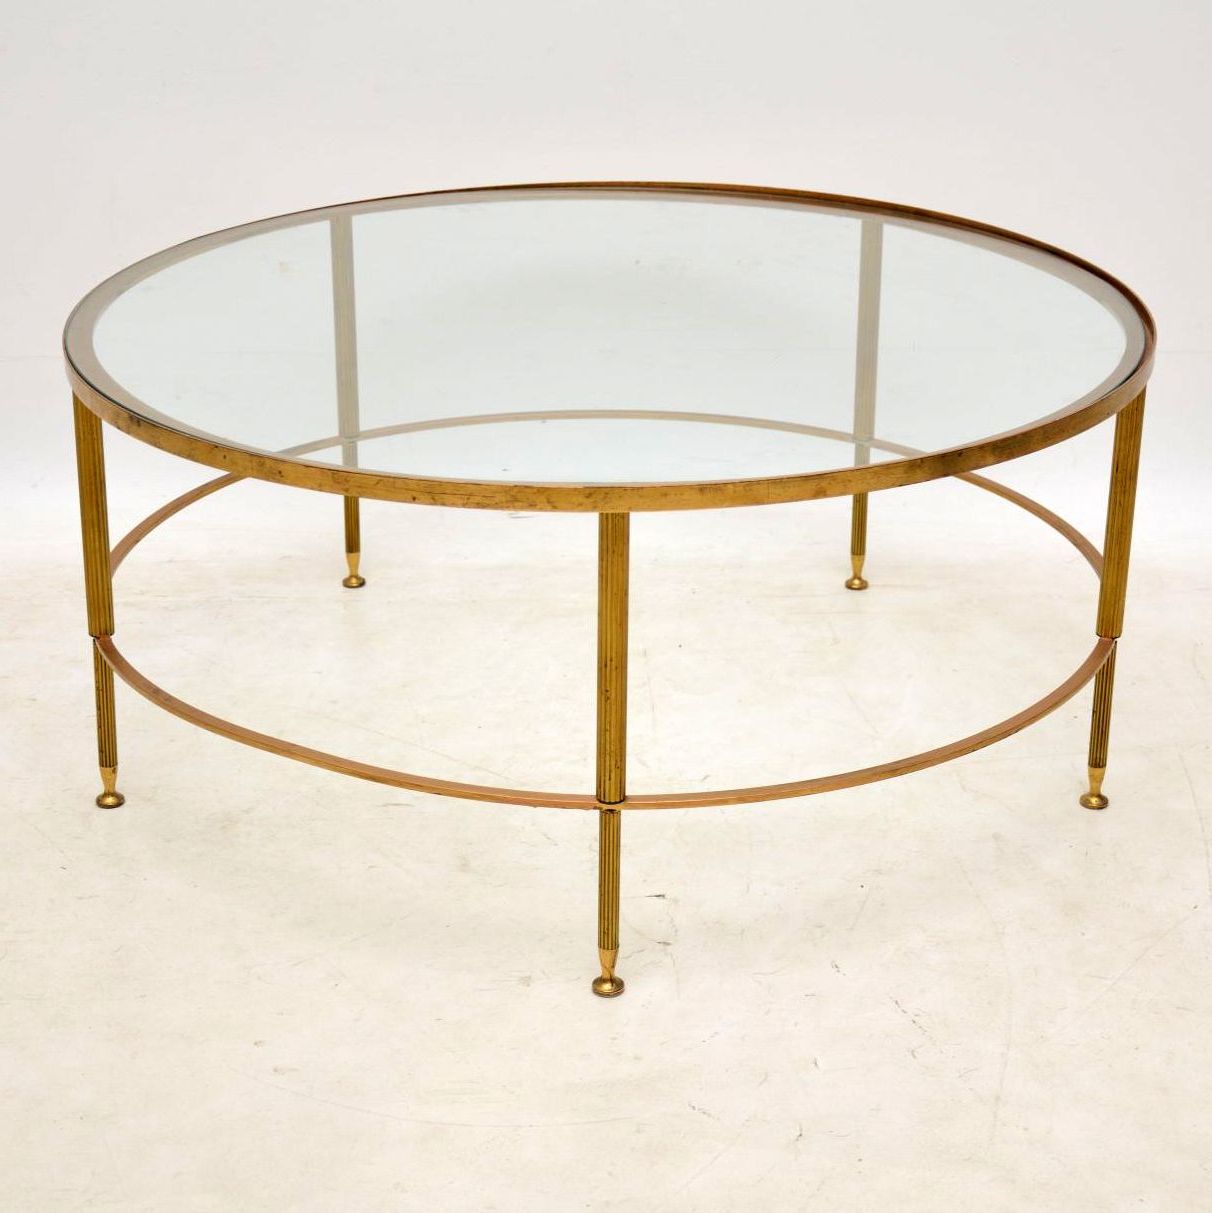 Antique Brass Aluminum Round Coffee Tables Throughout Most Up To Date 1960's French Brass & Glass Coffee Table (View 2 of 10)